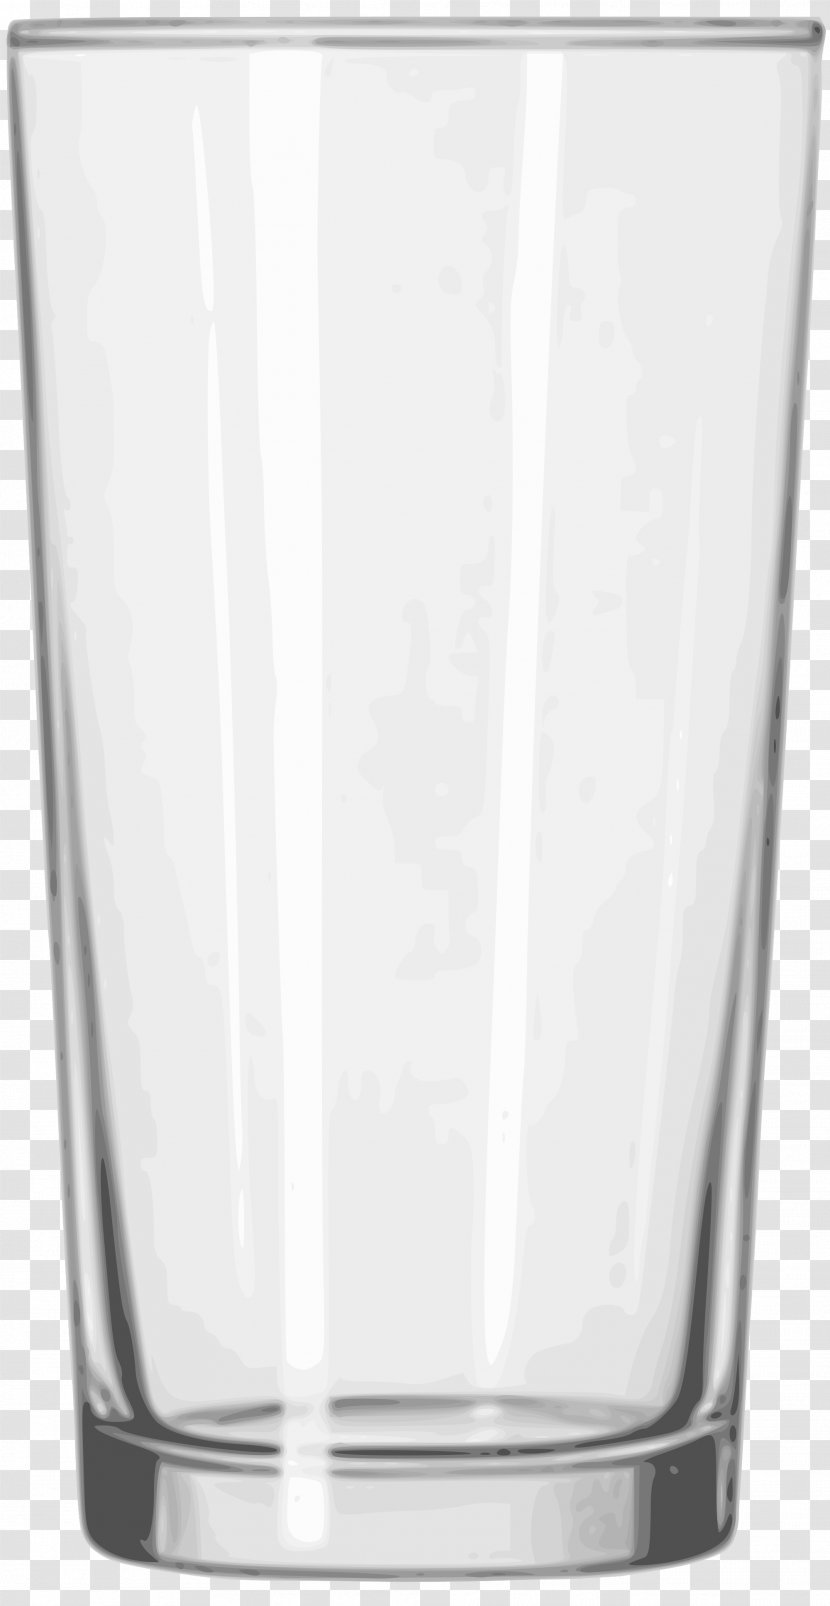 Iced Tea Glass Cup Tumbler - Wine - Drinking Image Transparent PNG